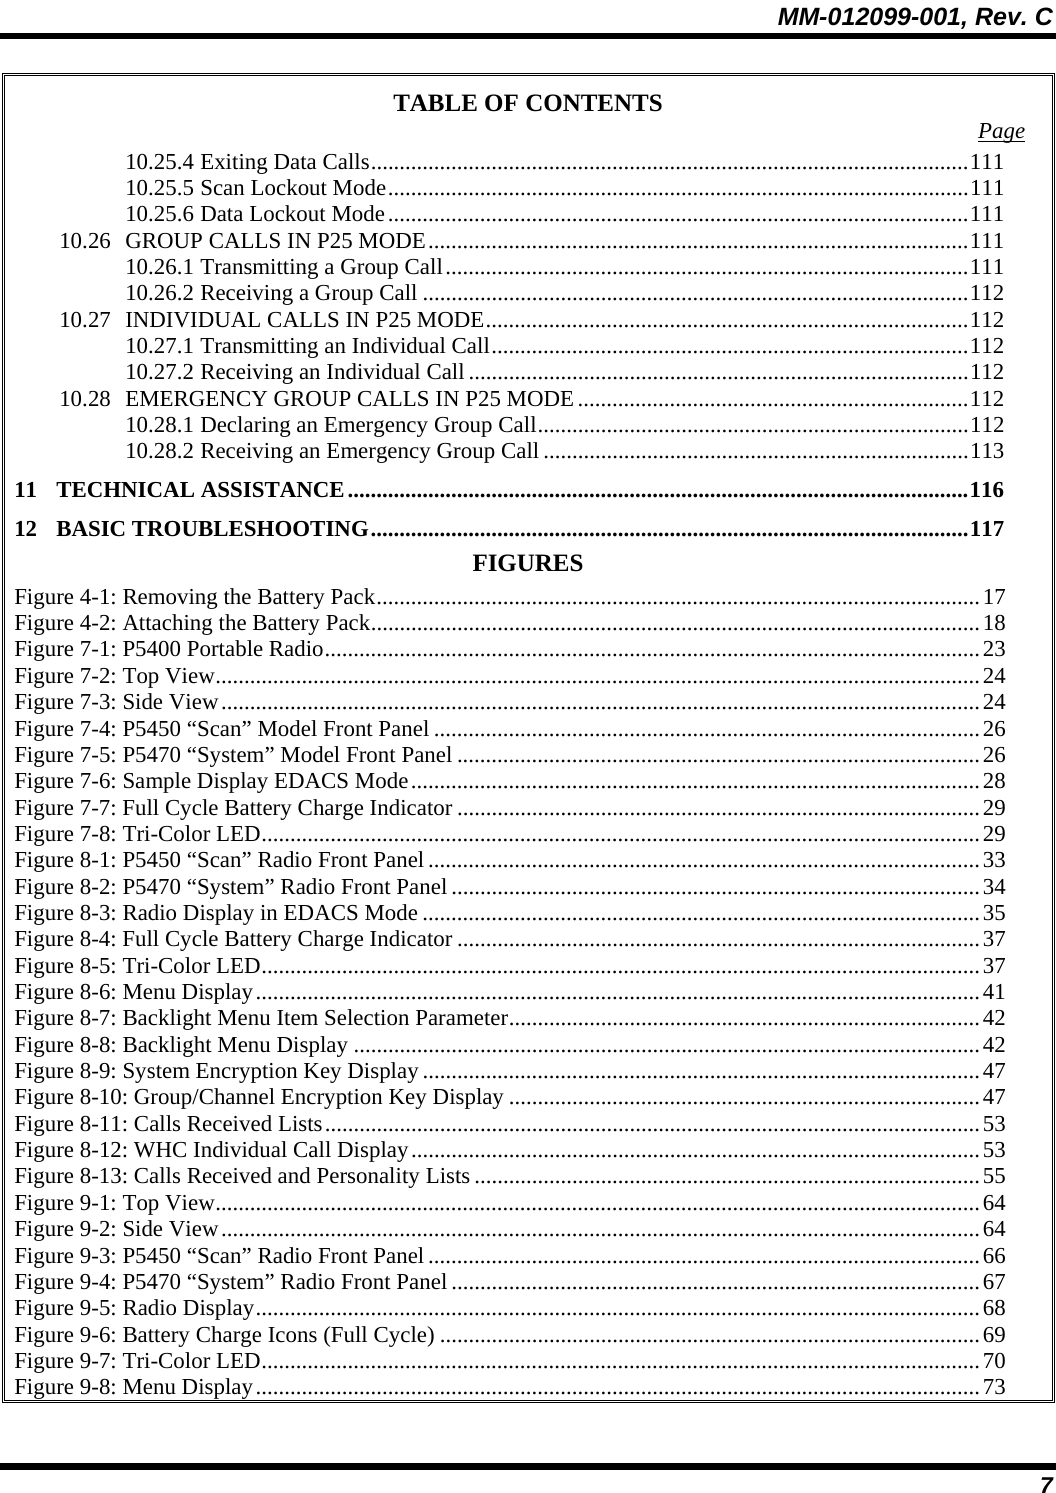 MM-012099-001, Rev. C 7 TABLE OF CONTENTS  Page 10.25.4 Exiting Data Calls........................................................................................................111 10.25.5 Scan Lockout Mode.....................................................................................................111 10.25.6 Data Lockout Mode.....................................................................................................111 10.26 GROUP CALLS IN P25 MODE..............................................................................................111 10.26.1 Transmitting a Group Call...........................................................................................111 10.26.2 Receiving a Group Call ...............................................................................................112 10.27 INDIVIDUAL CALLS IN P25 MODE....................................................................................112 10.27.1 Transmitting an Individual Call...................................................................................112 10.27.2 Receiving an Individual Call .......................................................................................112 10.28 EMERGENCY GROUP CALLS IN P25 MODE....................................................................112 10.28.1 Declaring an Emergency Group Call...........................................................................112 10.28.2 Receiving an Emergency Group Call ..........................................................................113 11 TECHNICAL ASSISTANCE............................................................................................................116 12 BASIC TROUBLESHOOTING........................................................................................................117 FIGURES Figure 4-1: Removing the Battery Pack.........................................................................................................17 Figure 4-2: Attaching the Battery Pack..........................................................................................................18 Figure 7-1: P5400 Portable Radio..................................................................................................................23 Figure 7-2: Top View.....................................................................................................................................24 Figure 7-3: Side View....................................................................................................................................24 Figure 7-4: P5450 “Scan” Model Front Panel ...............................................................................................26 Figure 7-5: P5470 “System” Model Front Panel ...........................................................................................26 Figure 7-6: Sample Display EDACS Mode...................................................................................................28 Figure 7-7: Full Cycle Battery Charge Indicator ...........................................................................................29 Figure 7-8: Tri-Color LED.............................................................................................................................29 Figure 8-1: P5450 “Scan” Radio Front Panel................................................................................................33 Figure 8-2: P5470 “System” Radio Front Panel ............................................................................................34 Figure 8-3: Radio Display in EDACS Mode .................................................................................................35 Figure 8-4: Full Cycle Battery Charge Indicator ...........................................................................................37 Figure 8-5: Tri-Color LED.............................................................................................................................37 Figure 8-6: Menu Display..............................................................................................................................41 Figure 8-7: Backlight Menu Item Selection Parameter..................................................................................42 Figure 8-8: Backlight Menu Display .............................................................................................................42 Figure 8-9: System Encryption Key Display .................................................................................................47 Figure 8-10: Group/Channel Encryption Key Display ..................................................................................47 Figure 8-11: Calls Received Lists..................................................................................................................53 Figure 8-12: WHC Individual Call Display...................................................................................................53 Figure 8-13: Calls Received and Personality Lists ........................................................................................55 Figure 9-1: Top View.....................................................................................................................................64 Figure 9-2: Side View....................................................................................................................................64 Figure 9-3: P5450 “Scan” Radio Front Panel................................................................................................66 Figure 9-4: P5470 “System” Radio Front Panel ............................................................................................67 Figure 9-5: Radio Display..............................................................................................................................68 Figure 9-6: Battery Charge Icons (Full Cycle) ..............................................................................................69 Figure 9-7: Tri-Color LED.............................................................................................................................70 Figure 9-8: Menu Display..............................................................................................................................73 